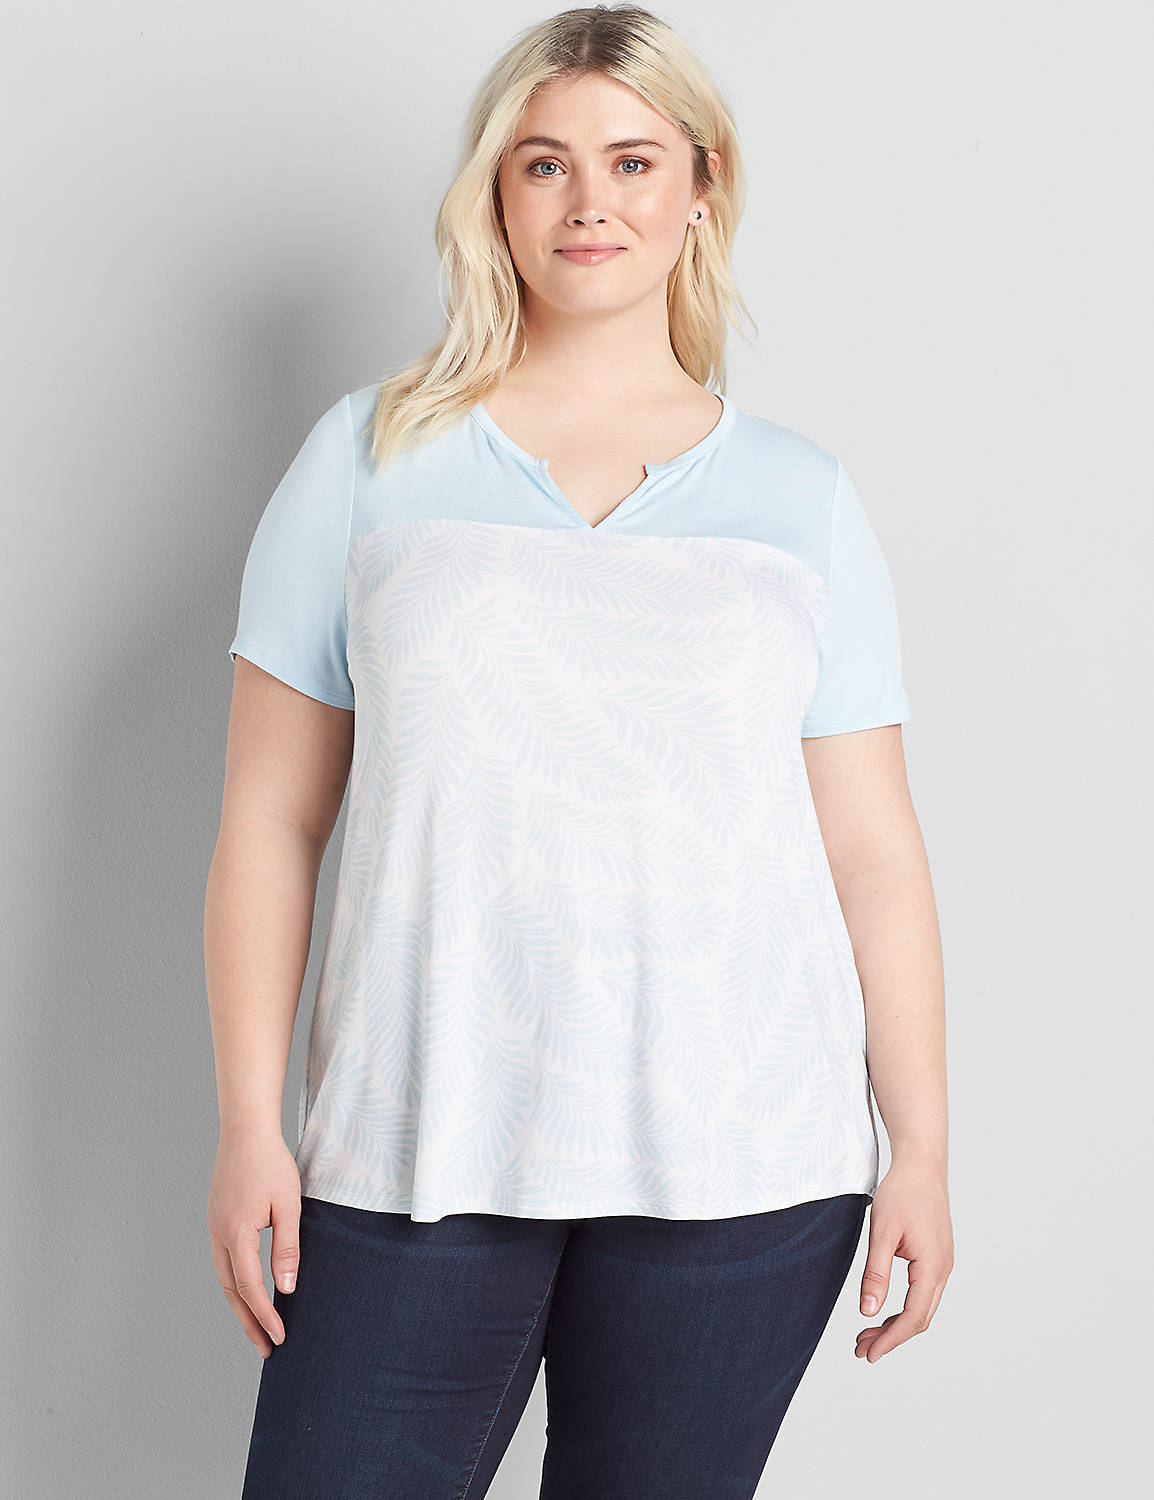 Notch-Neck High-Low Subtle Swing Tee Product Image 1